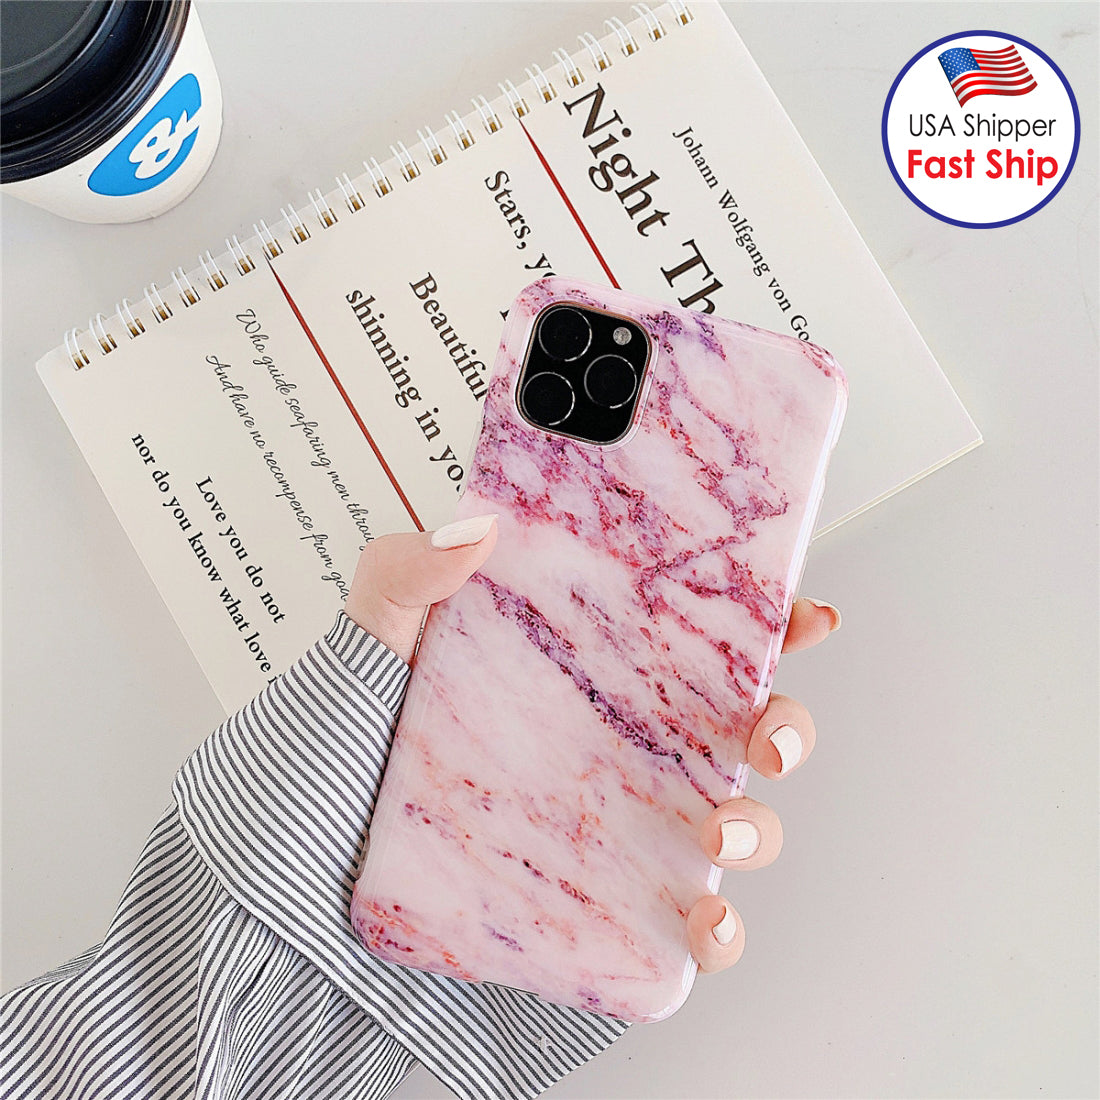 AMZER Marble IMD Soft TPU Protective Case for iPhone 11 Pro